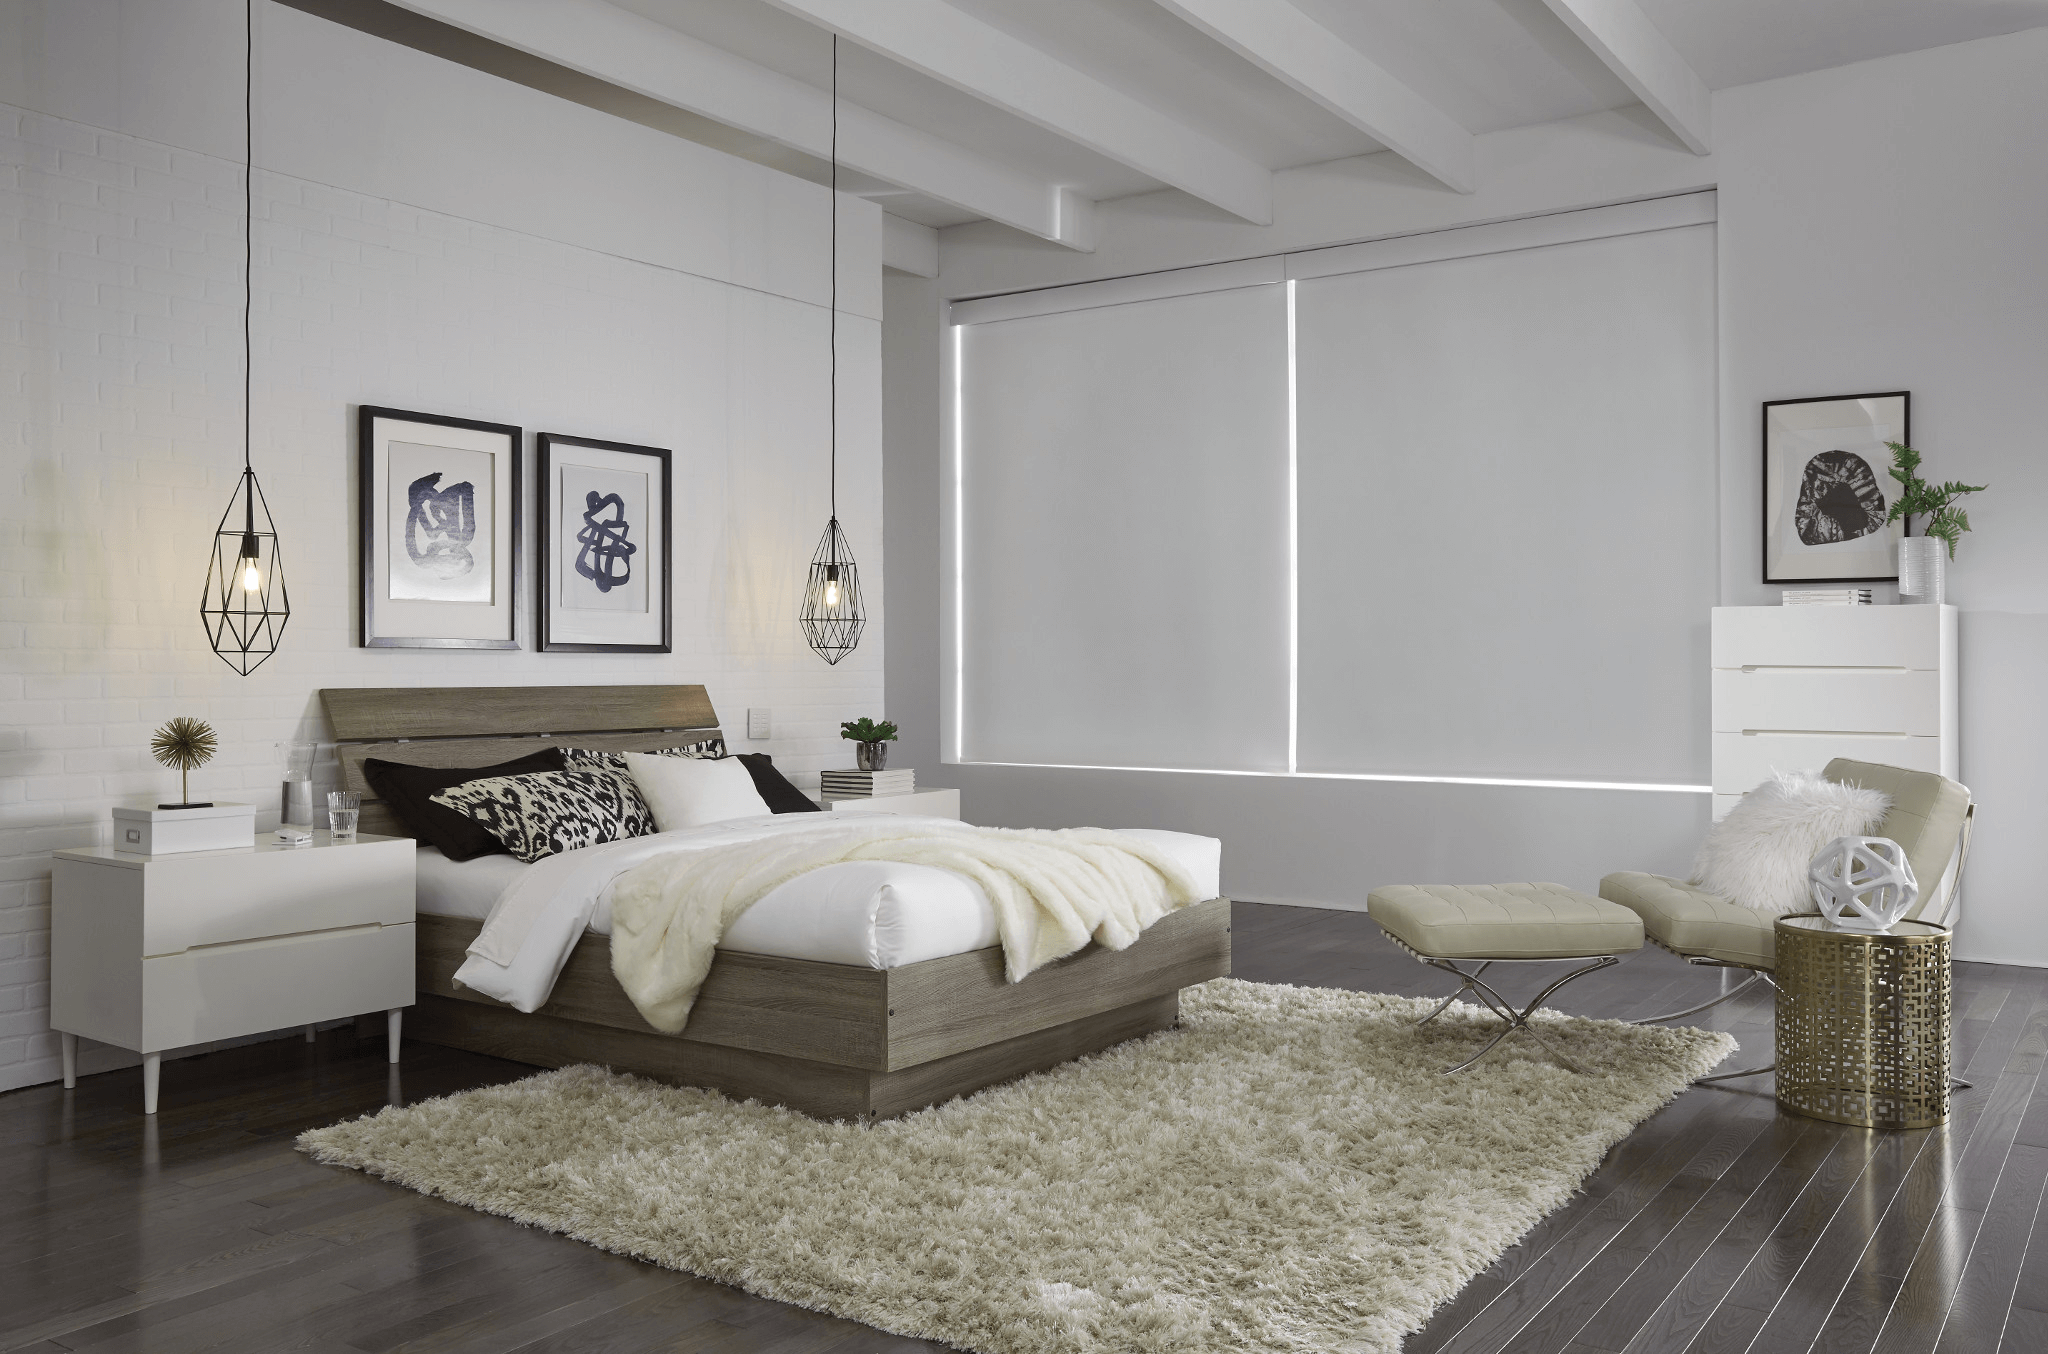 Somfy white roller shades with valance